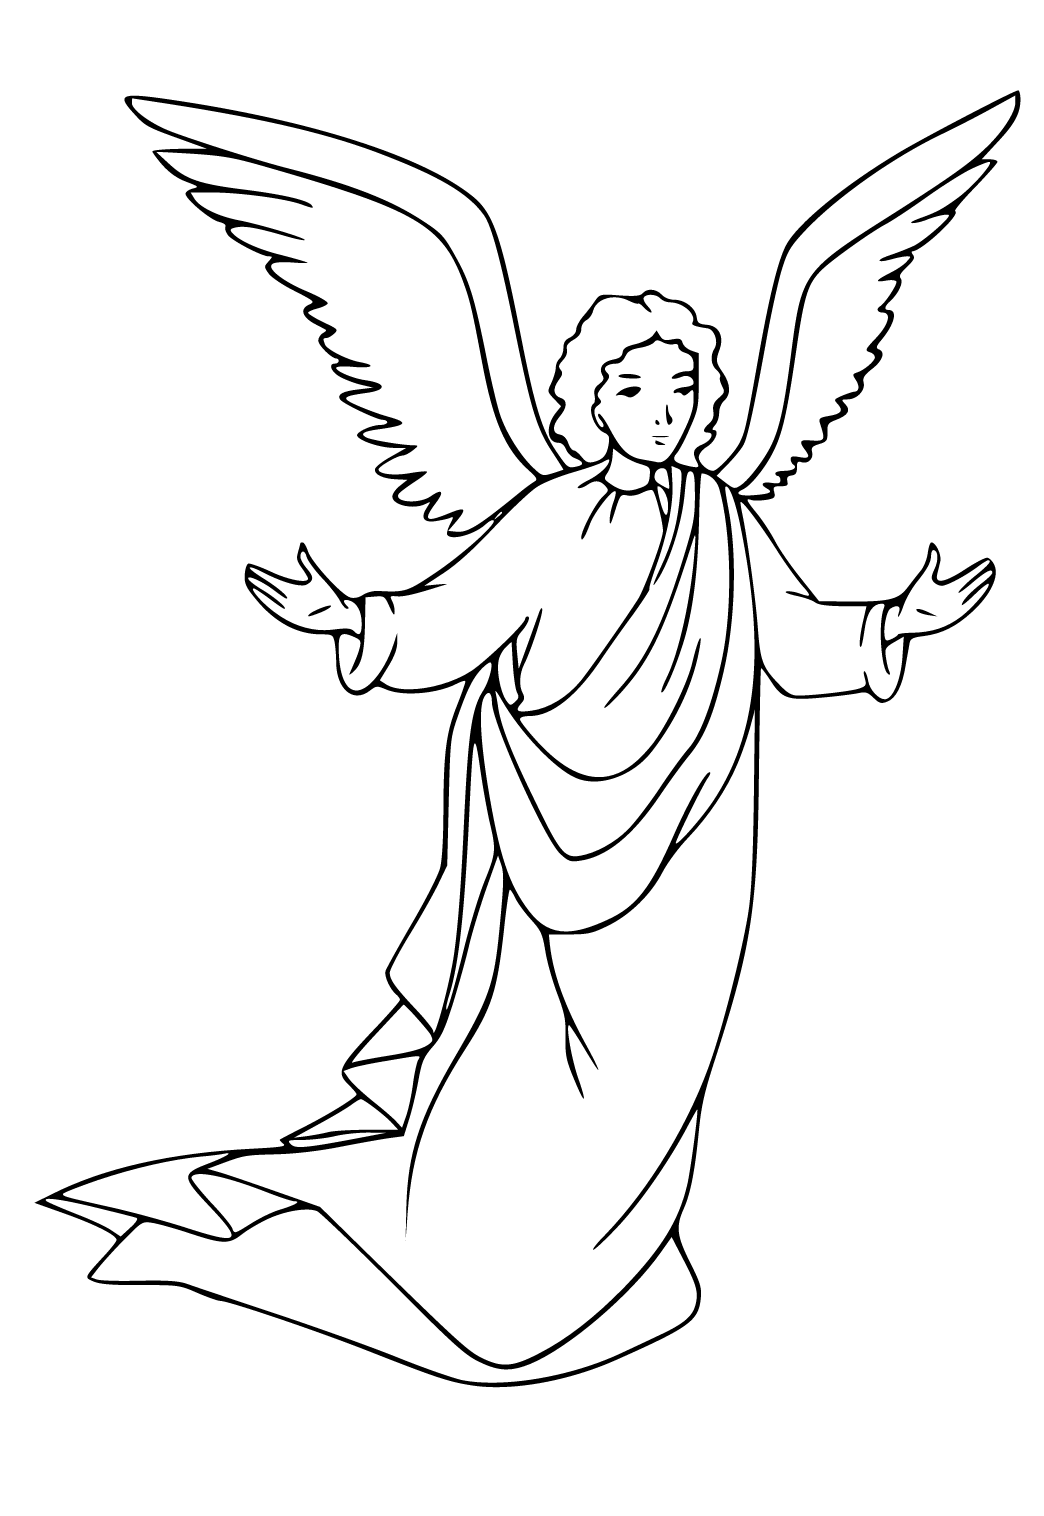 Free printable angel easy coloring page for adults and kids